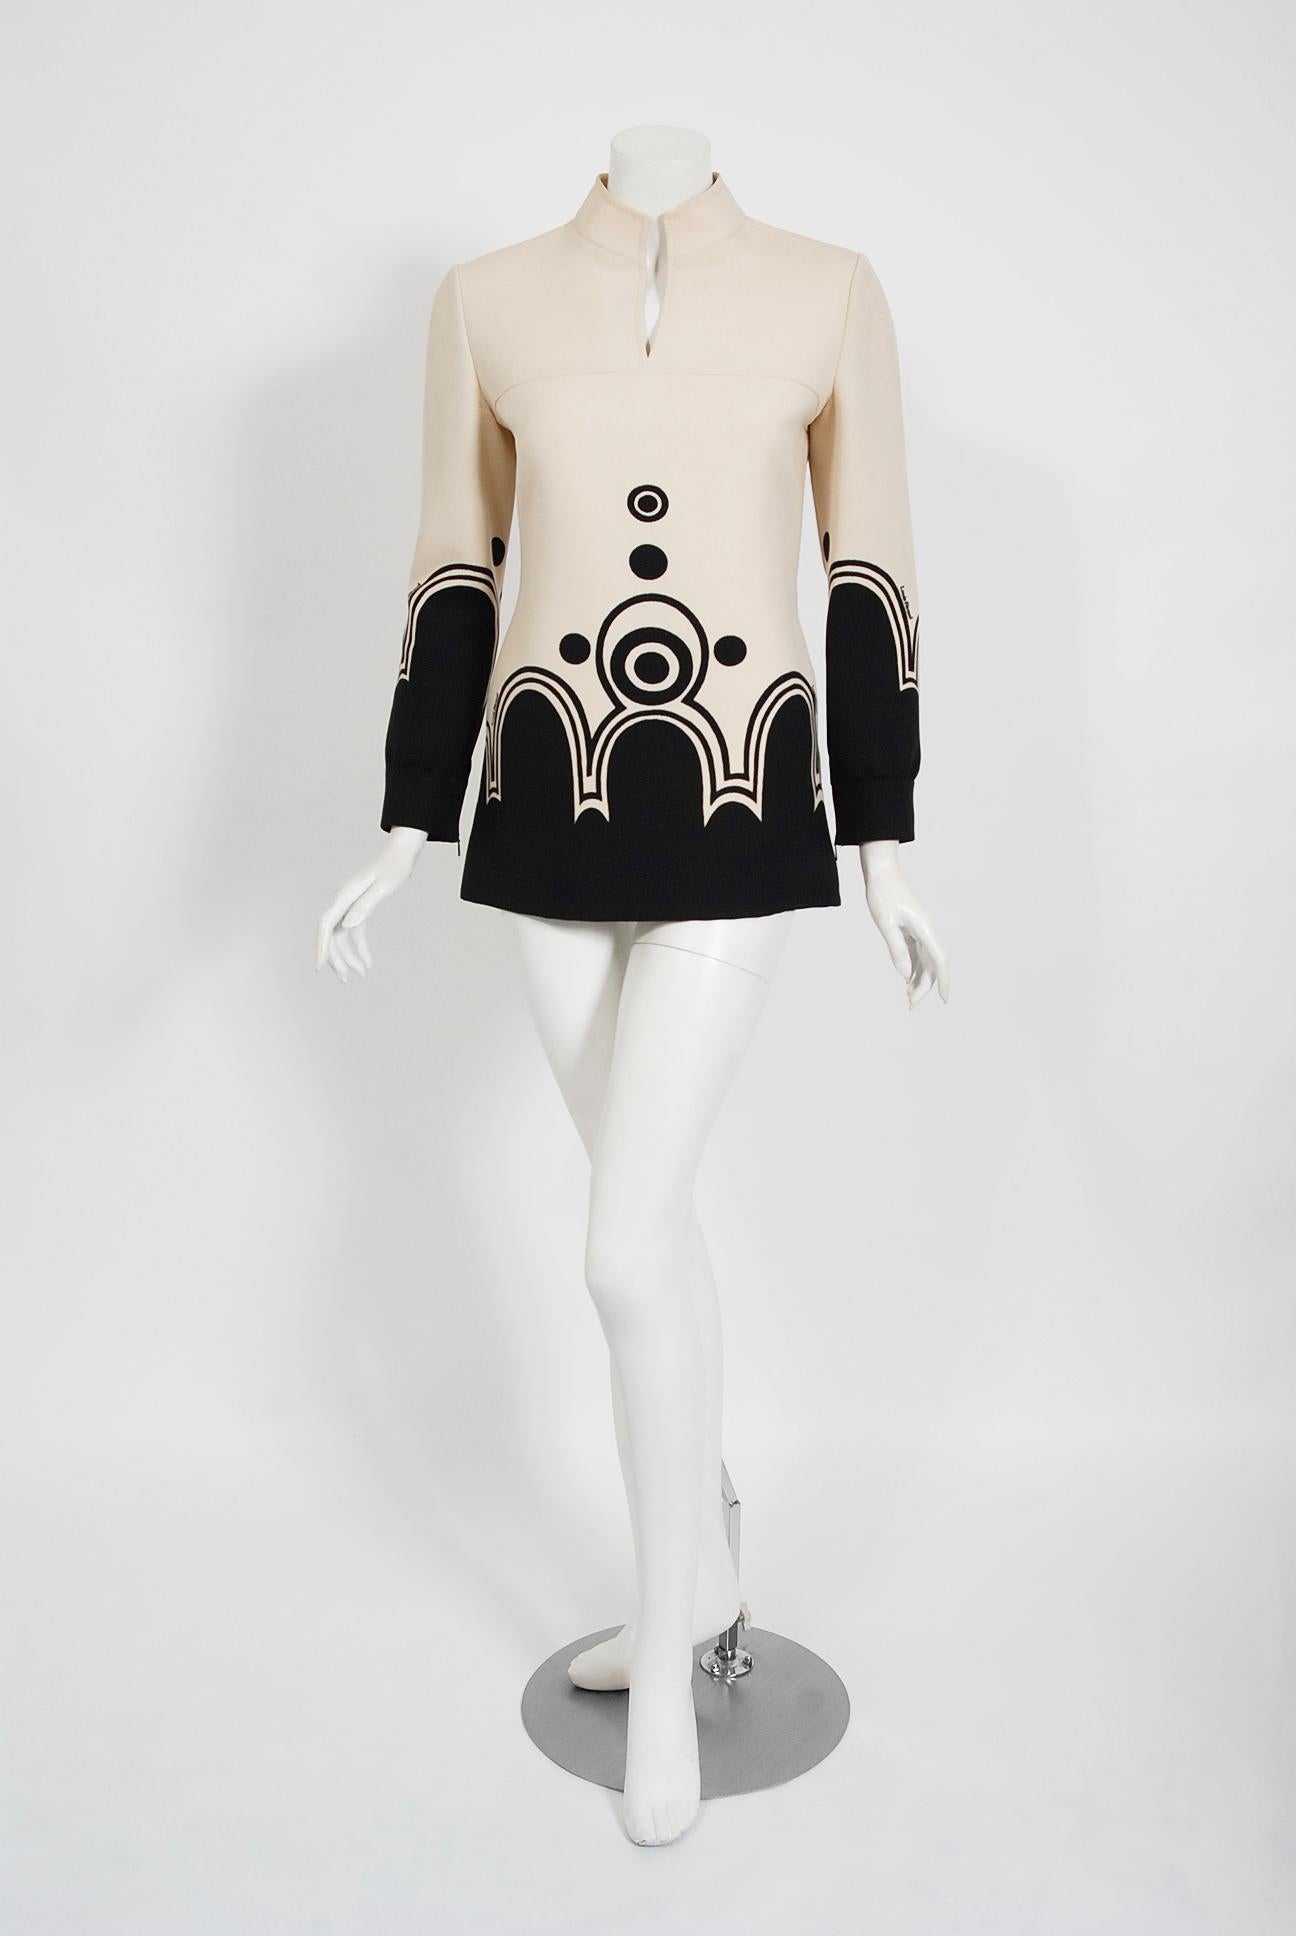 Breathtaking Louis Feraud graphic mid-weight wool crepe tunic from his 1969 iconic couture collection. Feraud's career started when he opened his first French boutique in 1955. As luck would have it, Brigitte Bardot bought one of his dresses and the